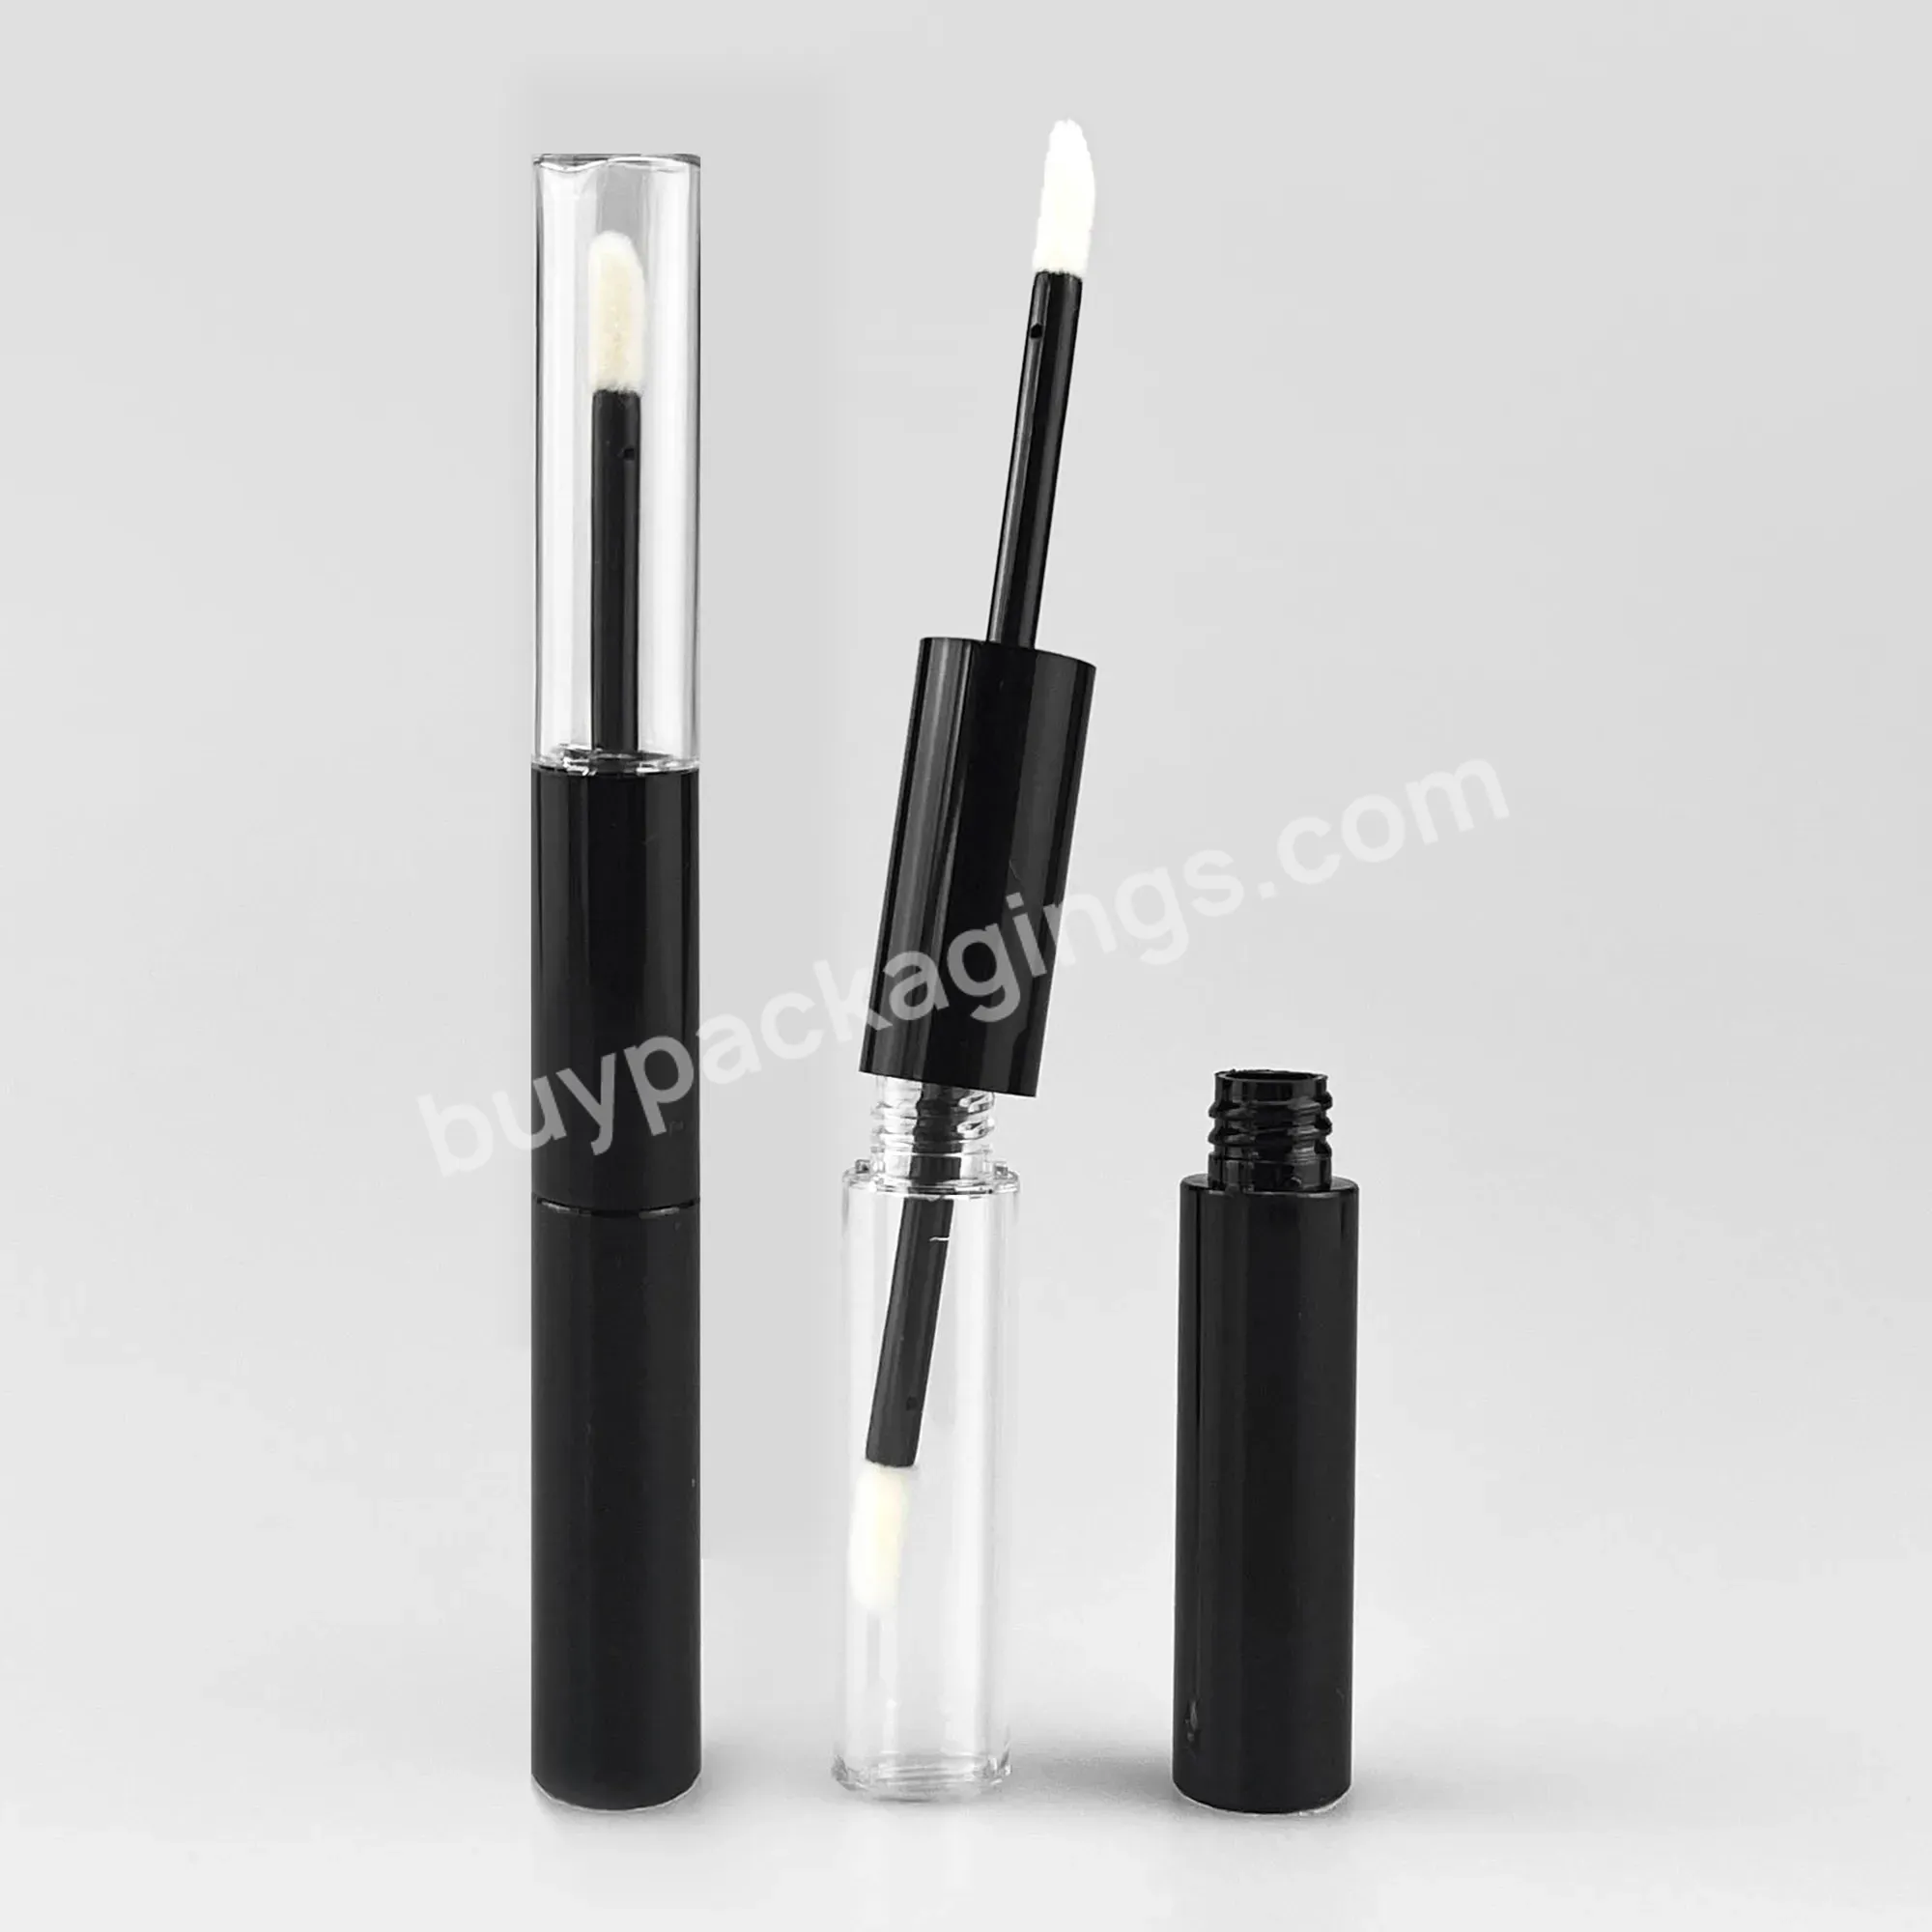 Cosmetics Packaging Plastic Double Sides Cosmetic Tube 5.5ml*2 Double Head Black Round Clear Lipgloss Tubes - Buy Double Head Clear Lipgloss Tubes Empty Wholesale Lipgloss Bottle With Brush,Round Black Clear Lipgloss Tubes 5.5ml*2 Mascara Eyeliner Tu